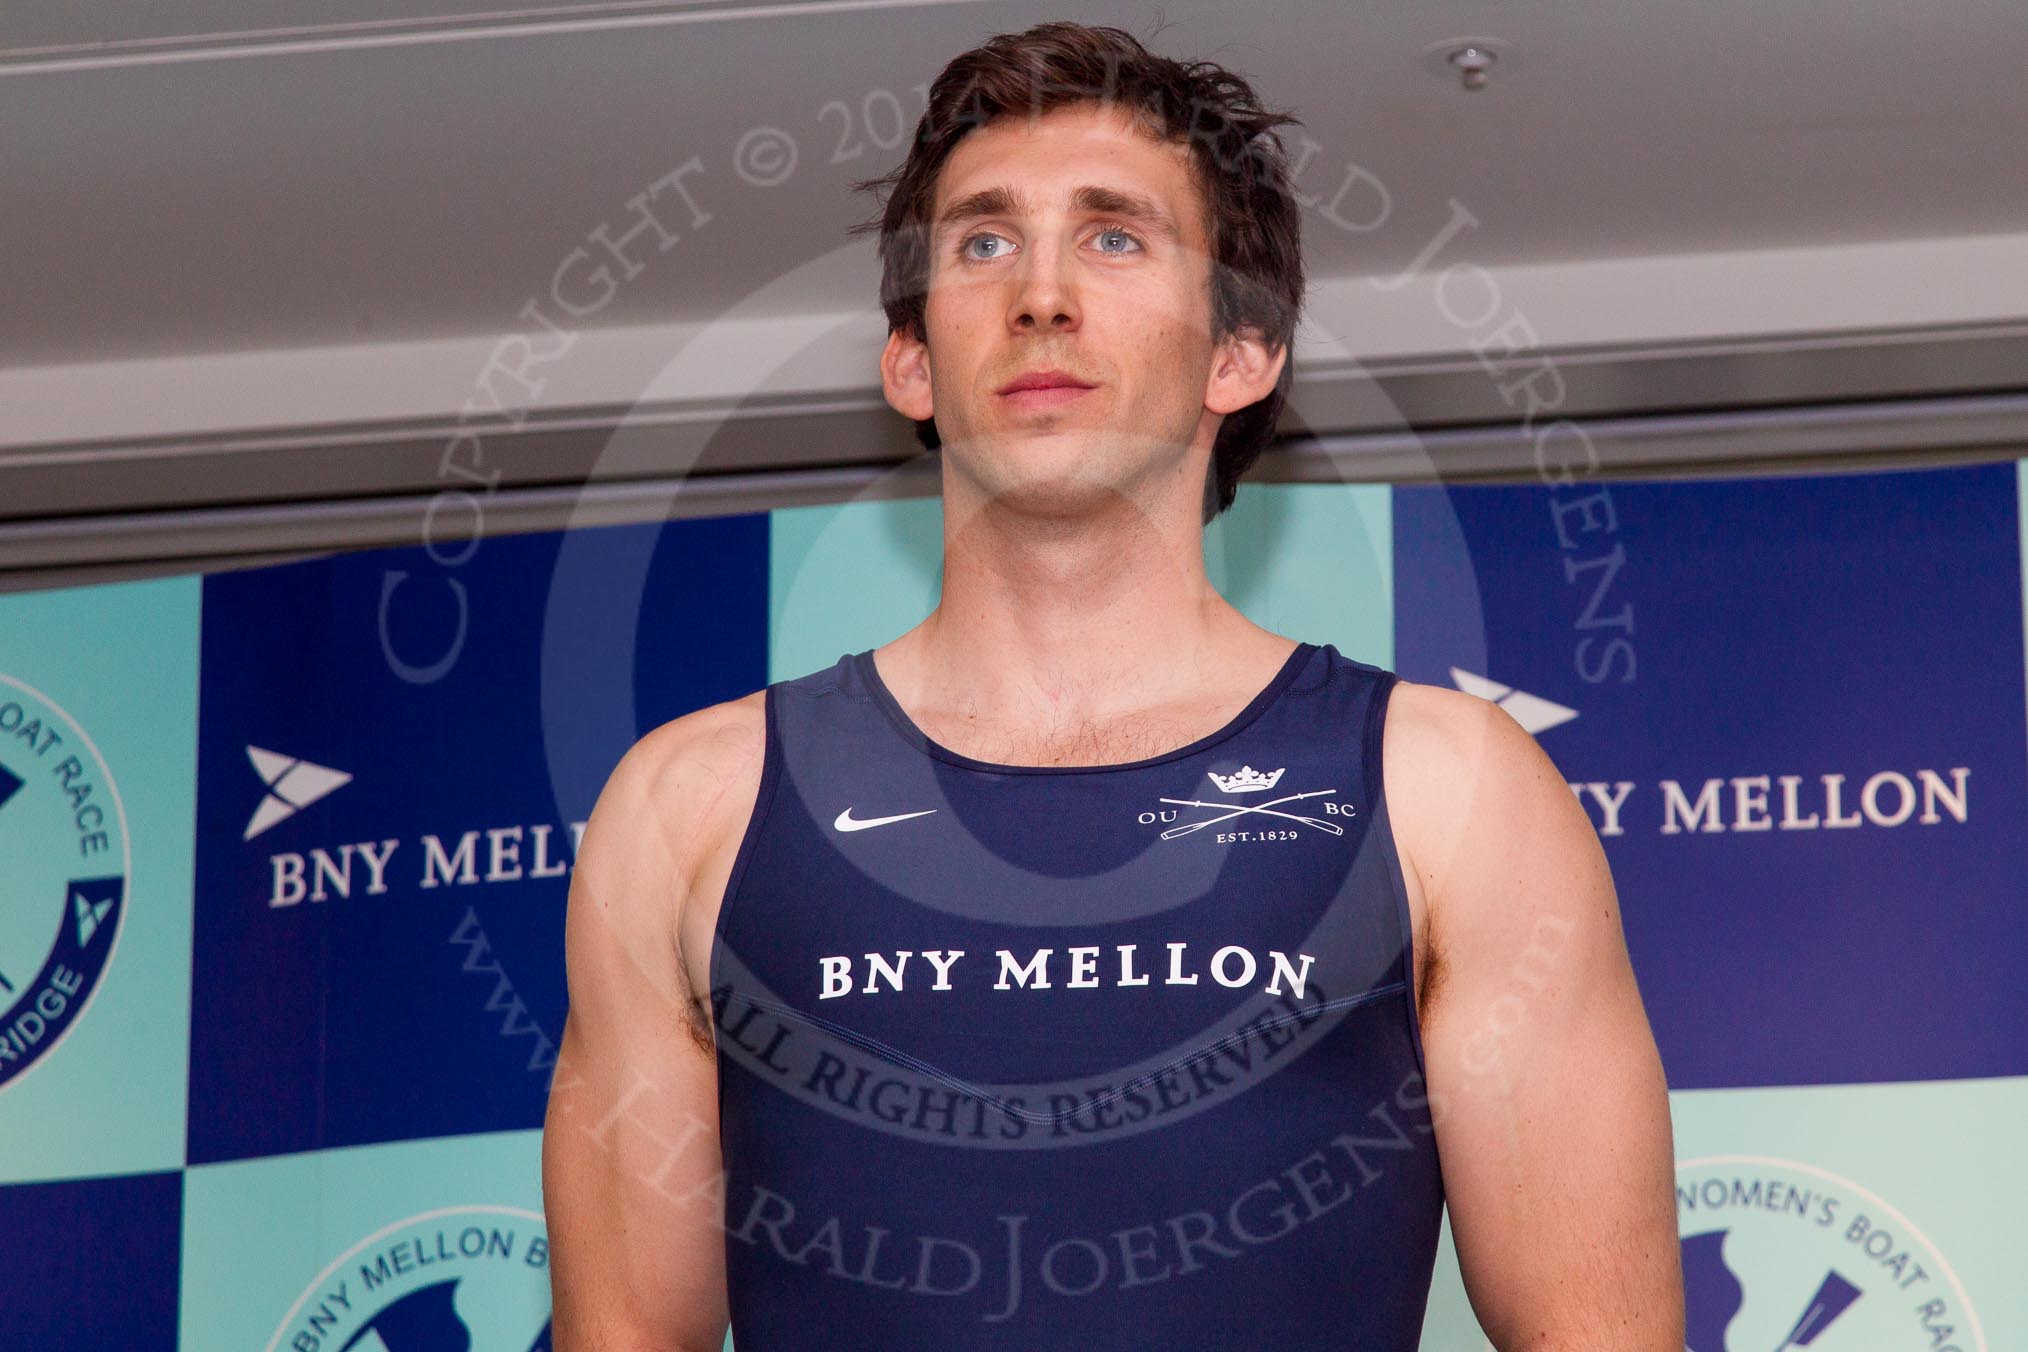 The Boat Race season 2014 - Crew Announcement and Weigh In: The 2014 Boat Race crew: Oxford 7 seat Sam O’Connor - 88.8kg..
BNY Mellon Centre,
London EC4V 4LA,
London,
United Kingdom,
on 10 March 2014 at 12:04, image #106